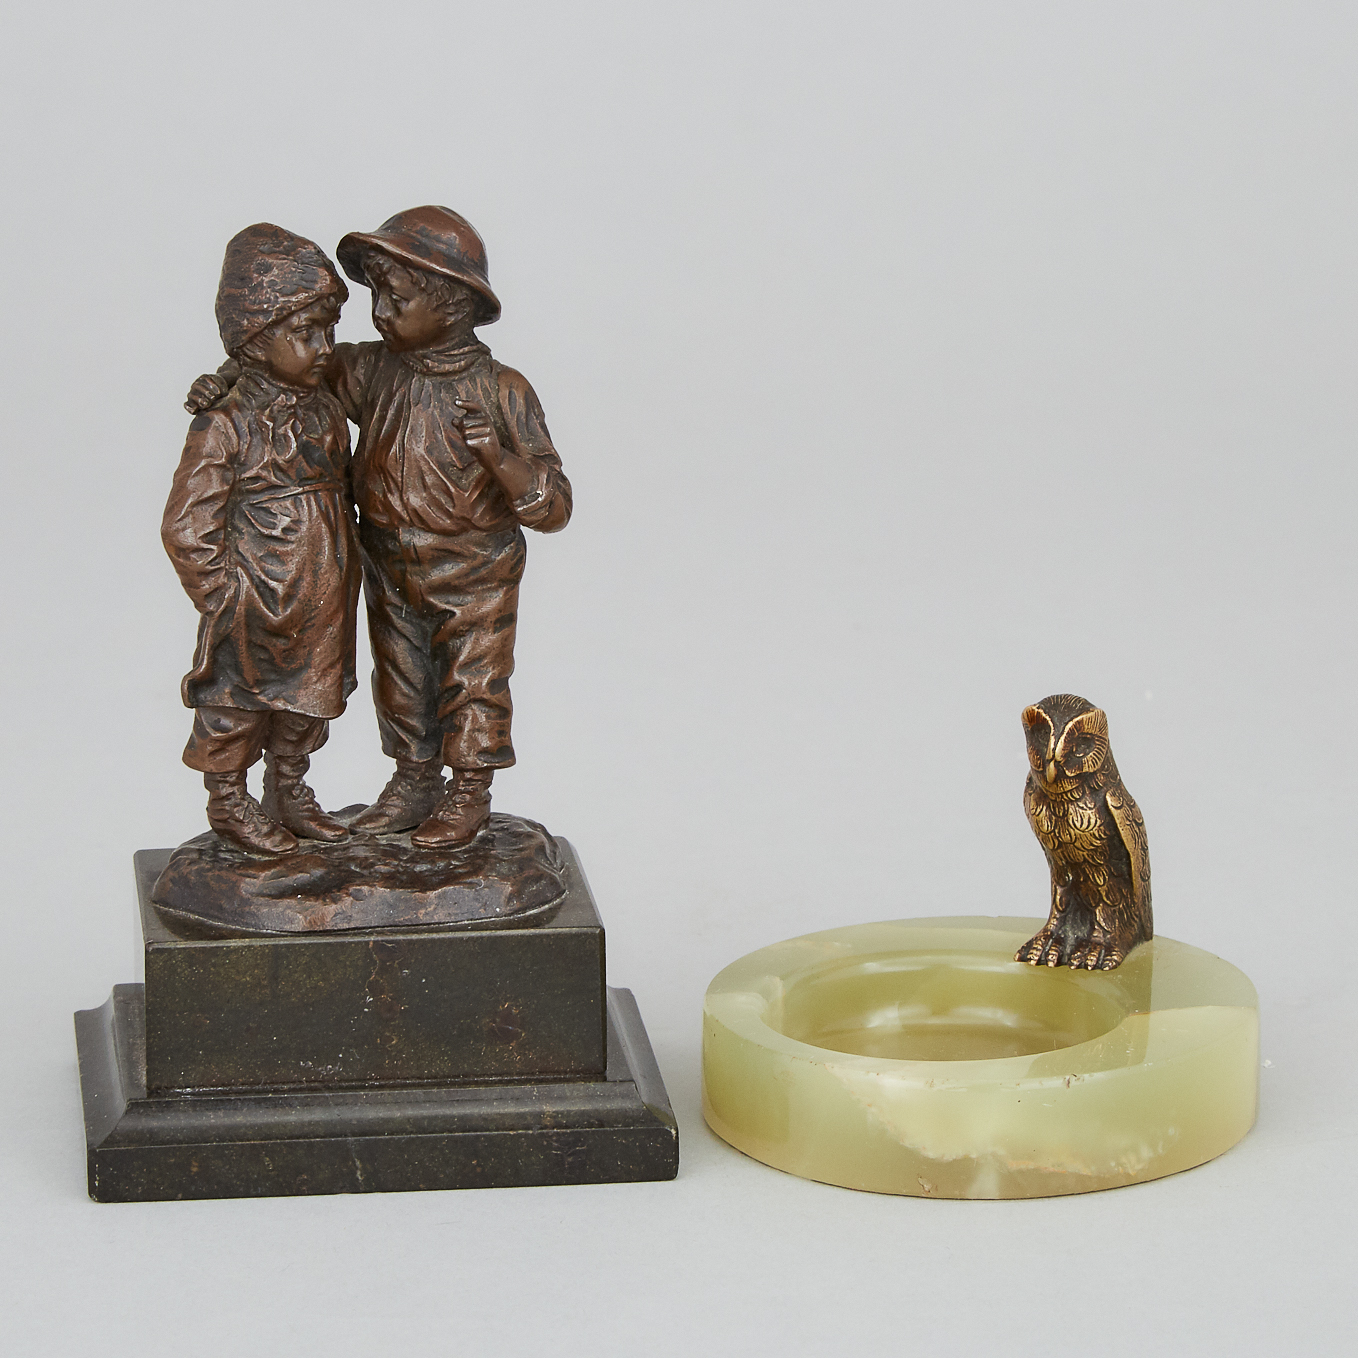 Two Small Bronzes, early 20th century